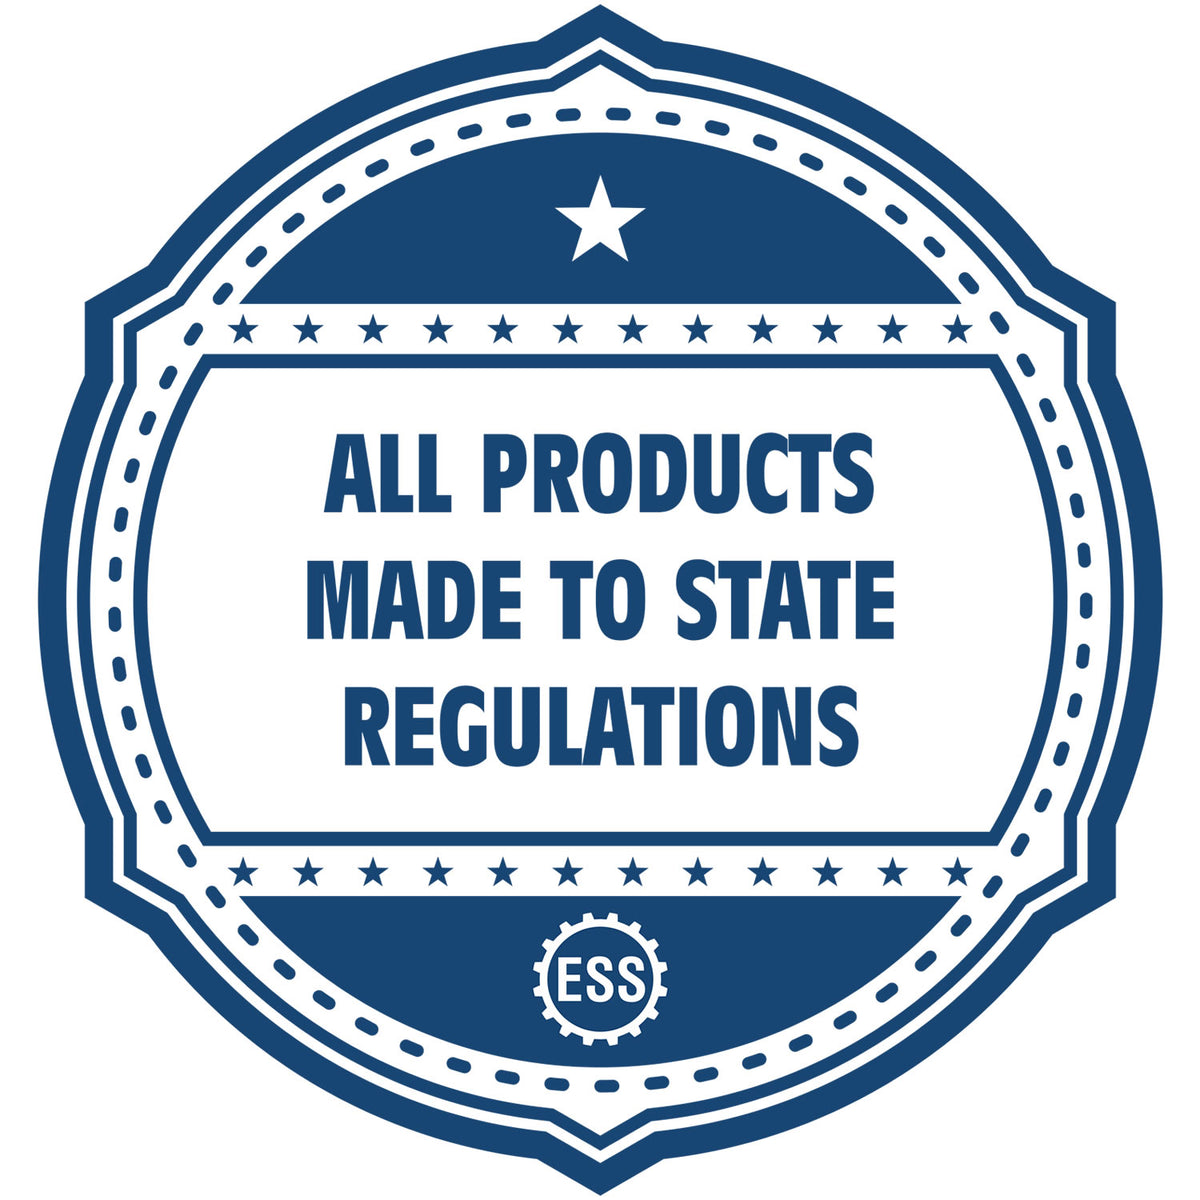 An icon or badge element for the Heavy Duty Cast Iron Georgia Engineer Seal Embosser showing that this product is made in compliance with state regulations.